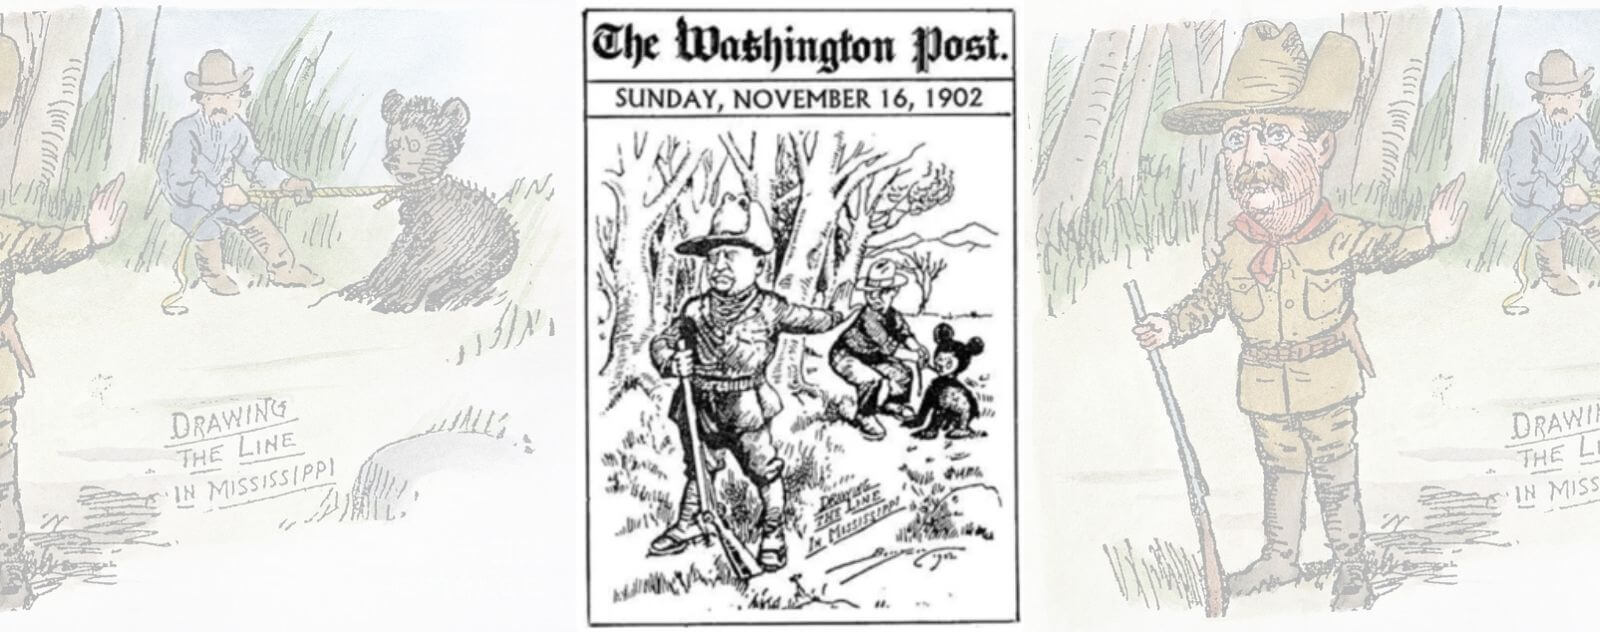 Theodore Roosevelt et le Premier Ours en Peluche (Caricature Drawing The Line in Mississippi)